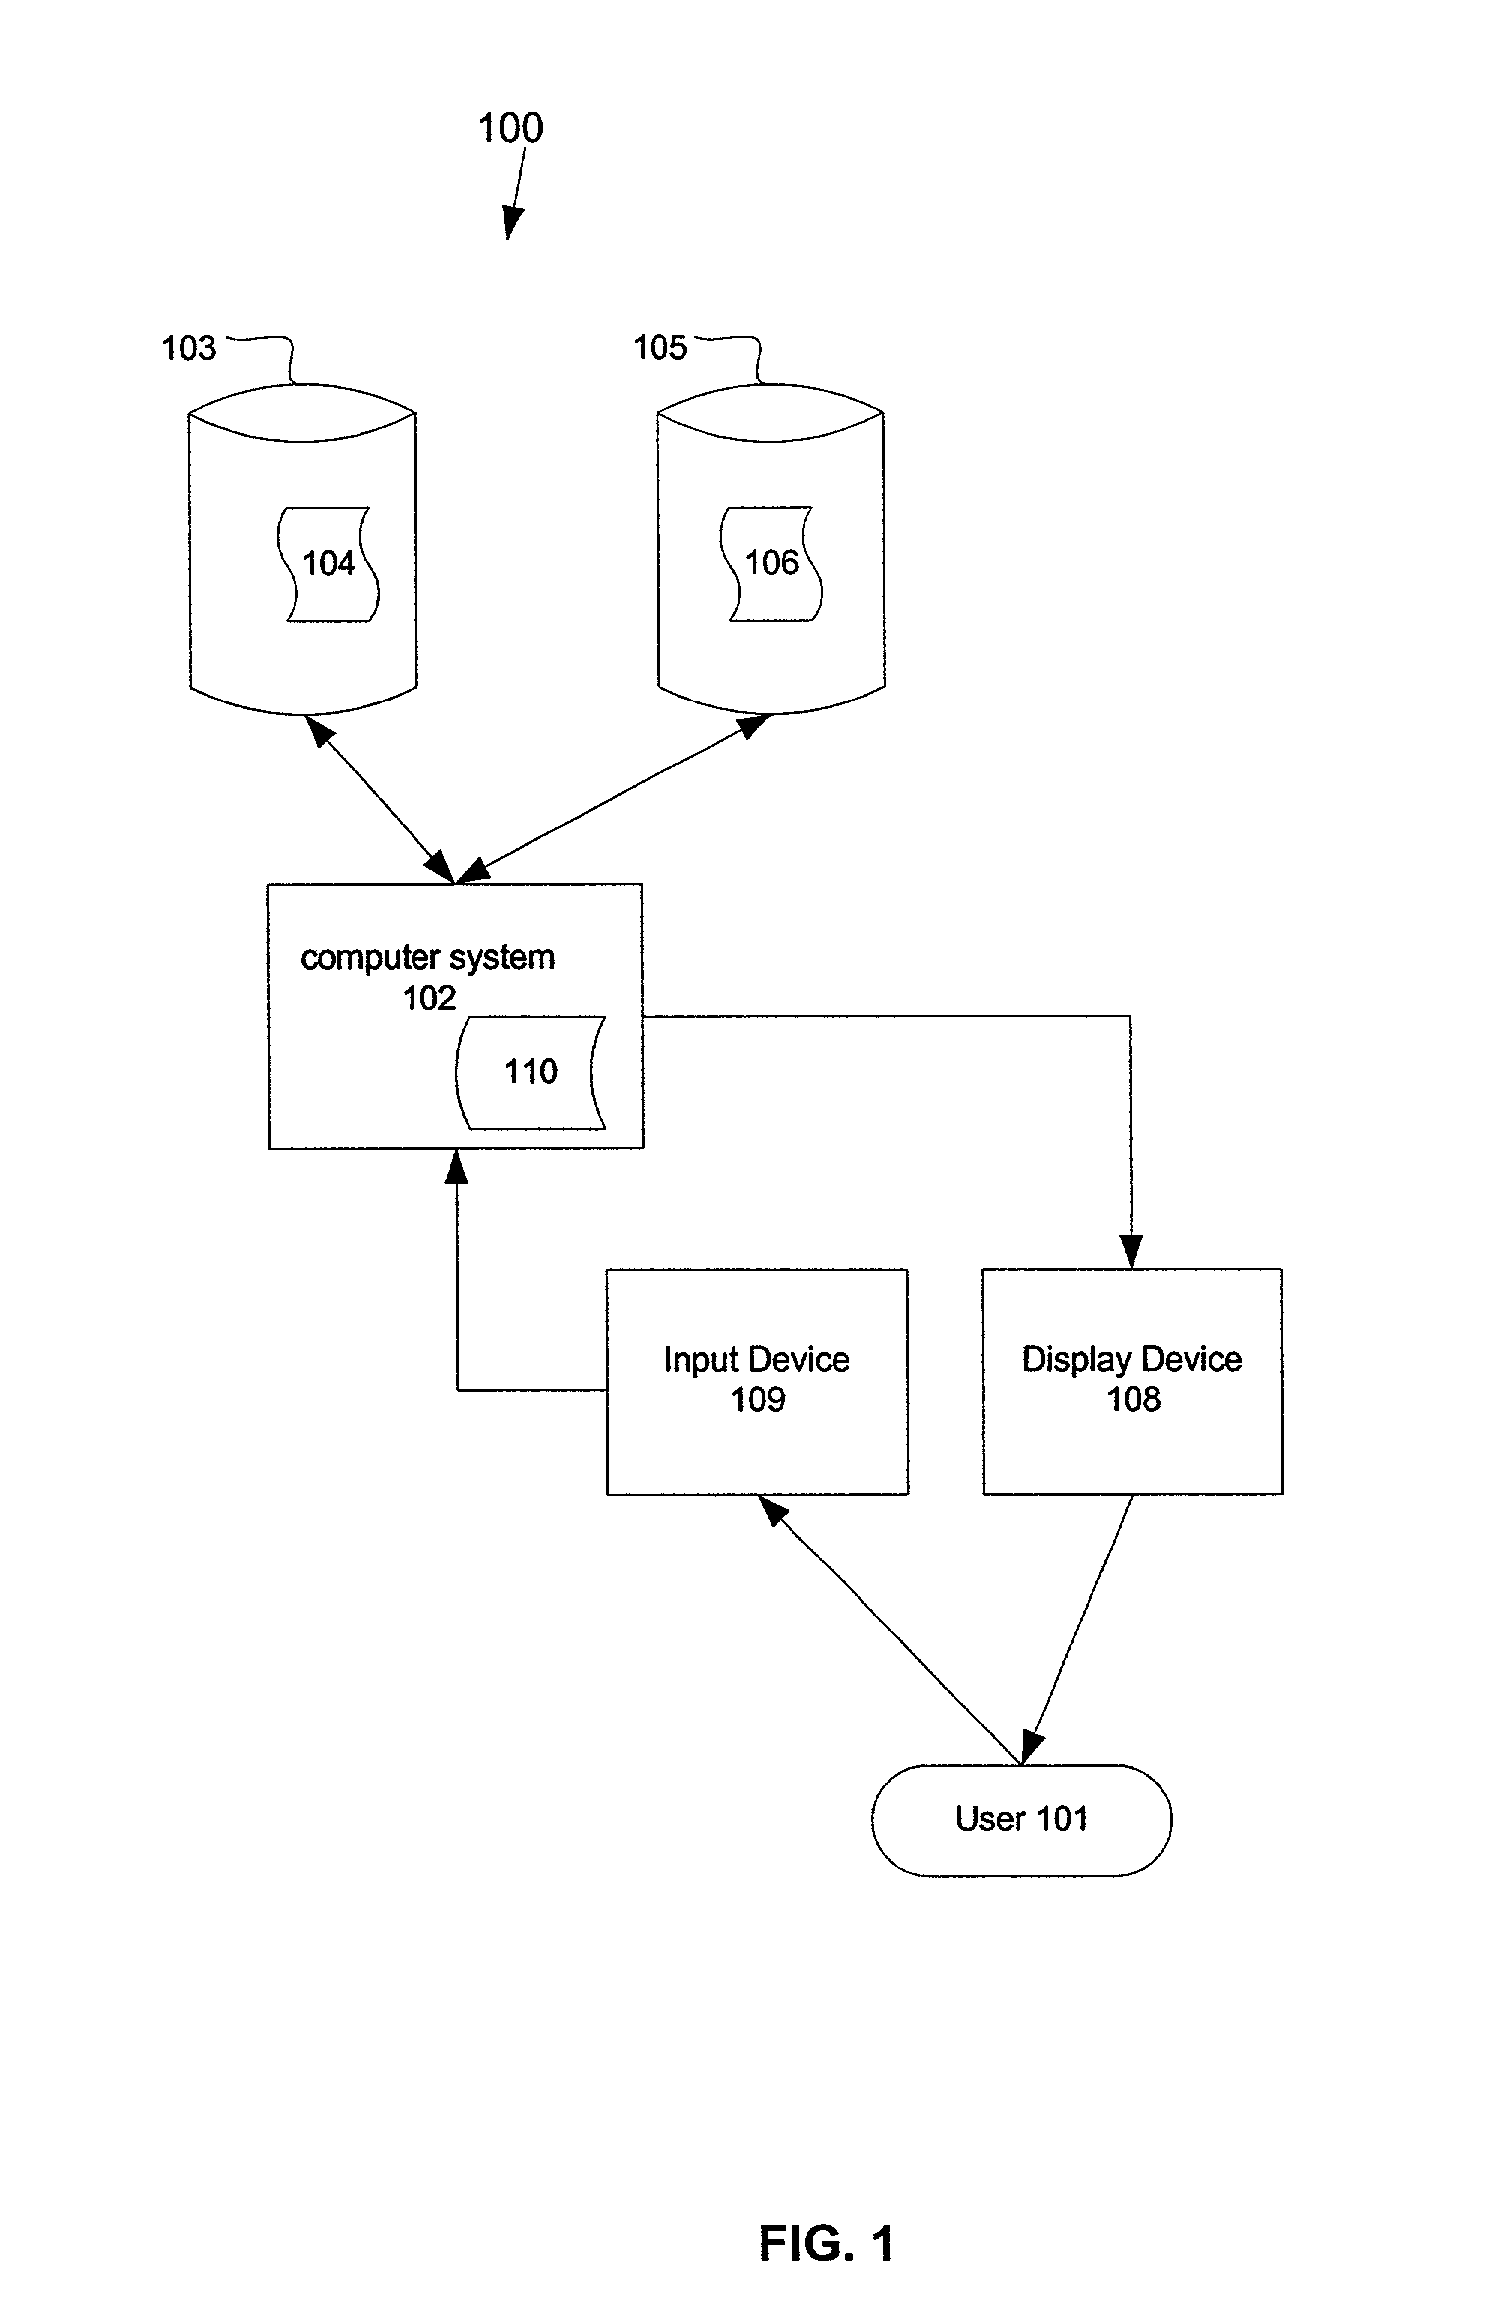 System and method for formulating reasonable spelling variations of a proper name